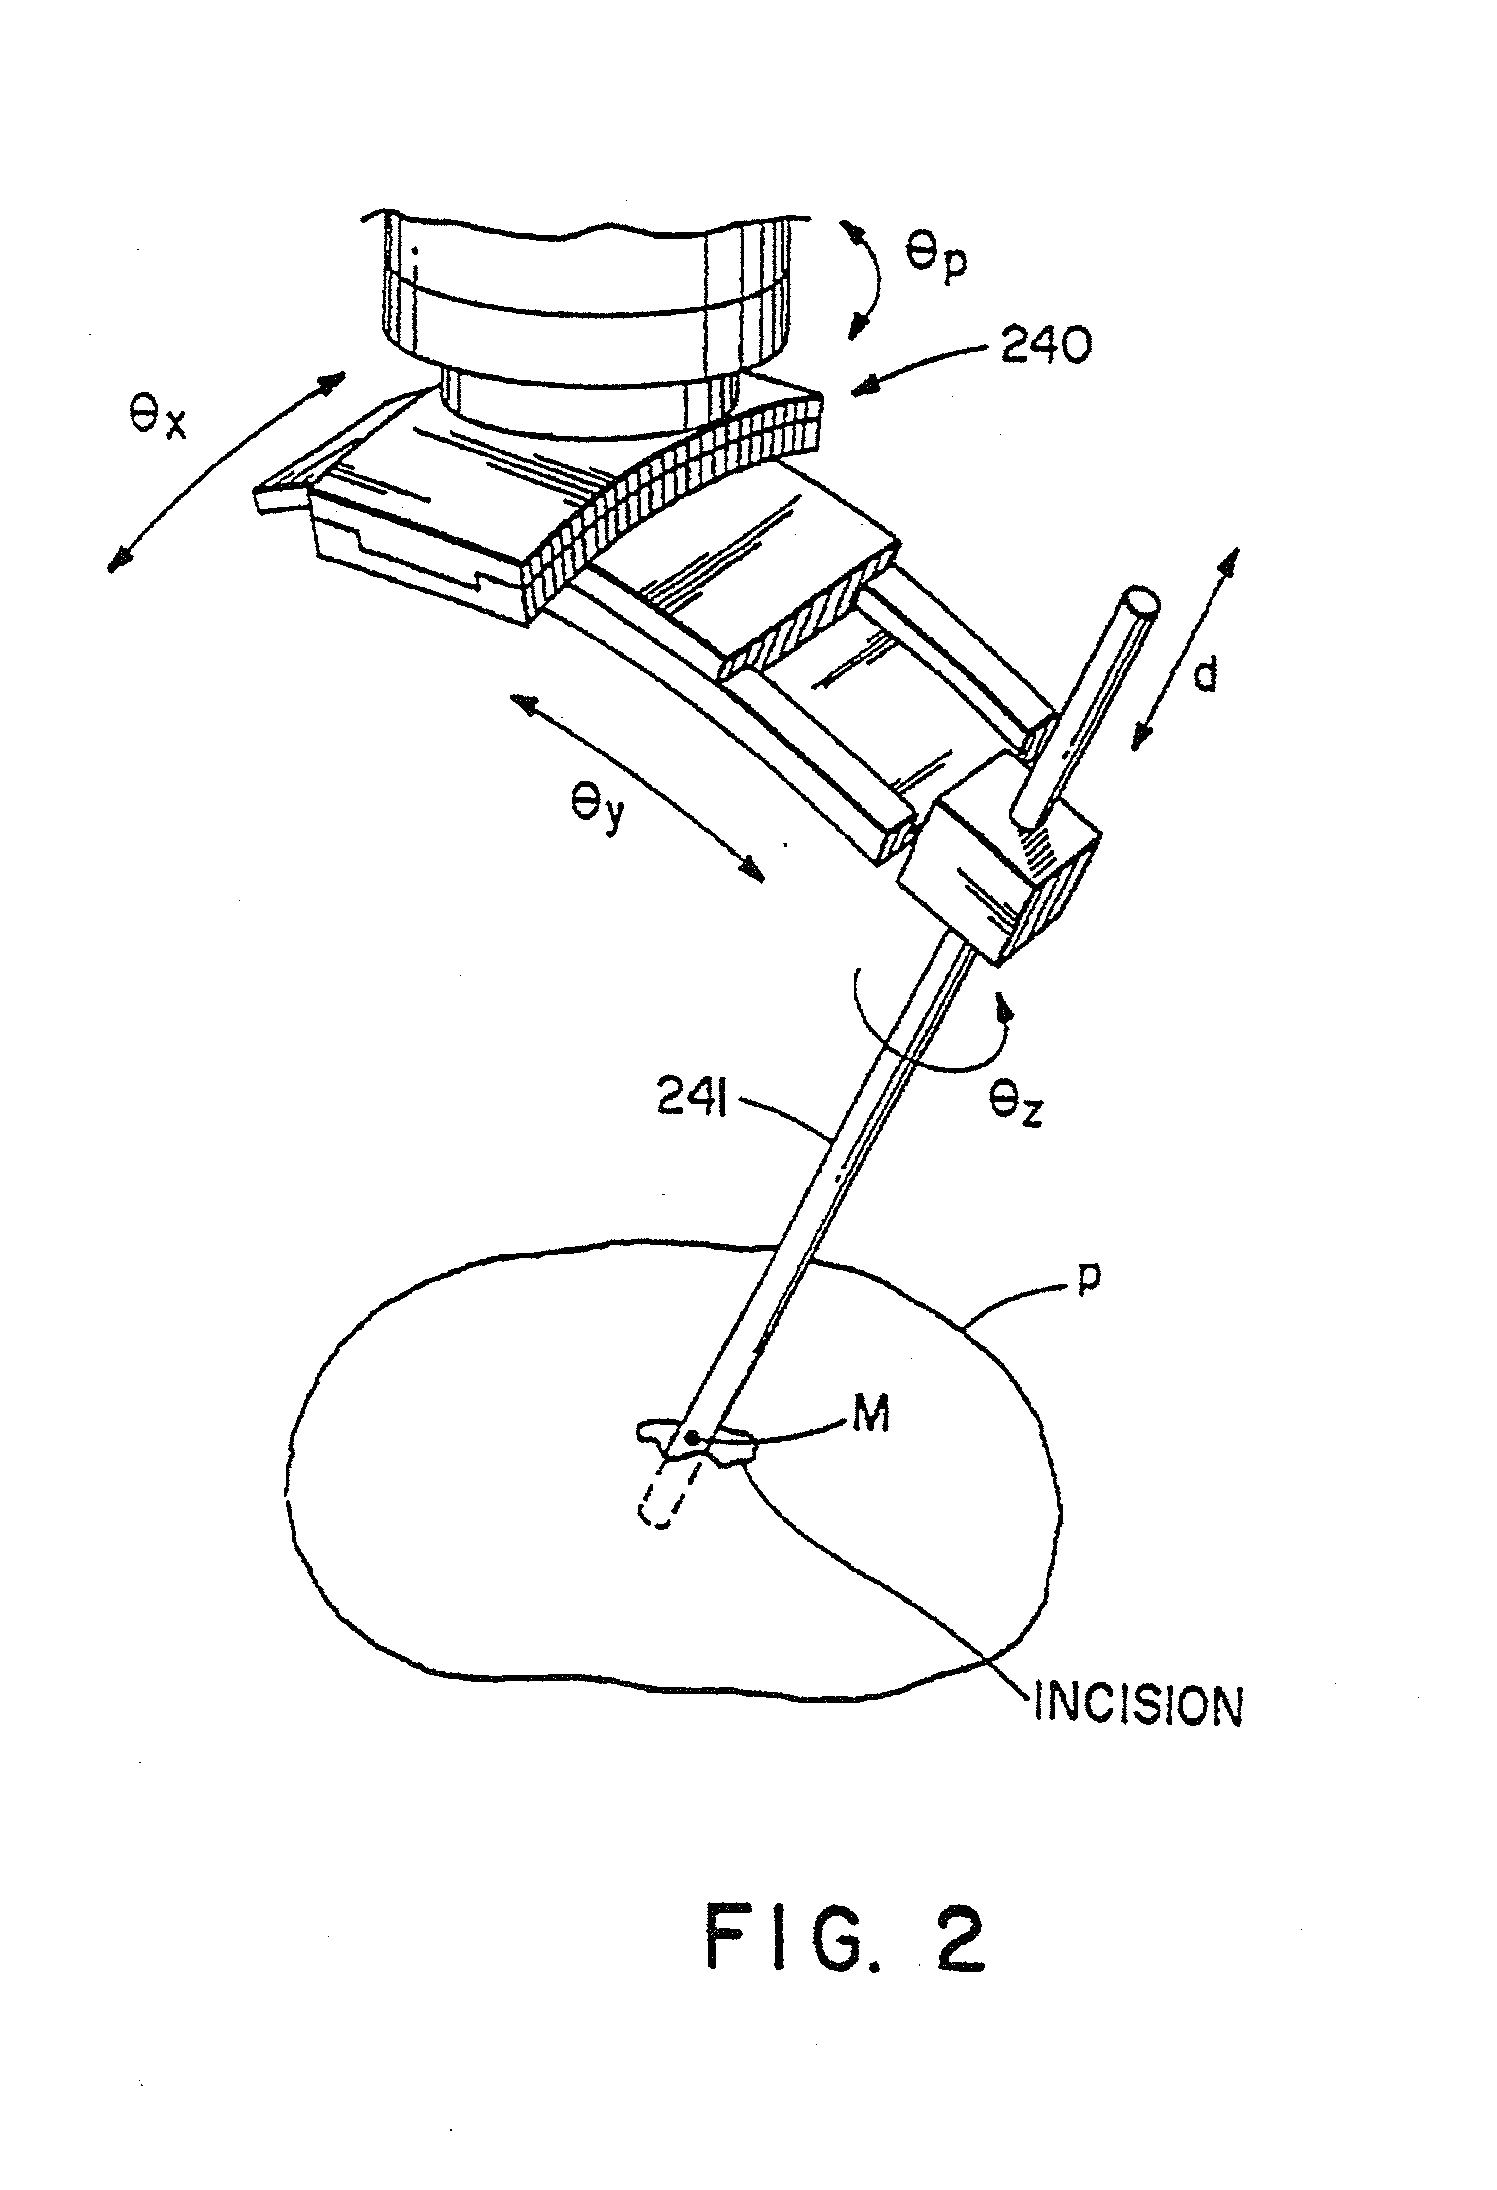 System and method for augmentation of endoscopic surgery